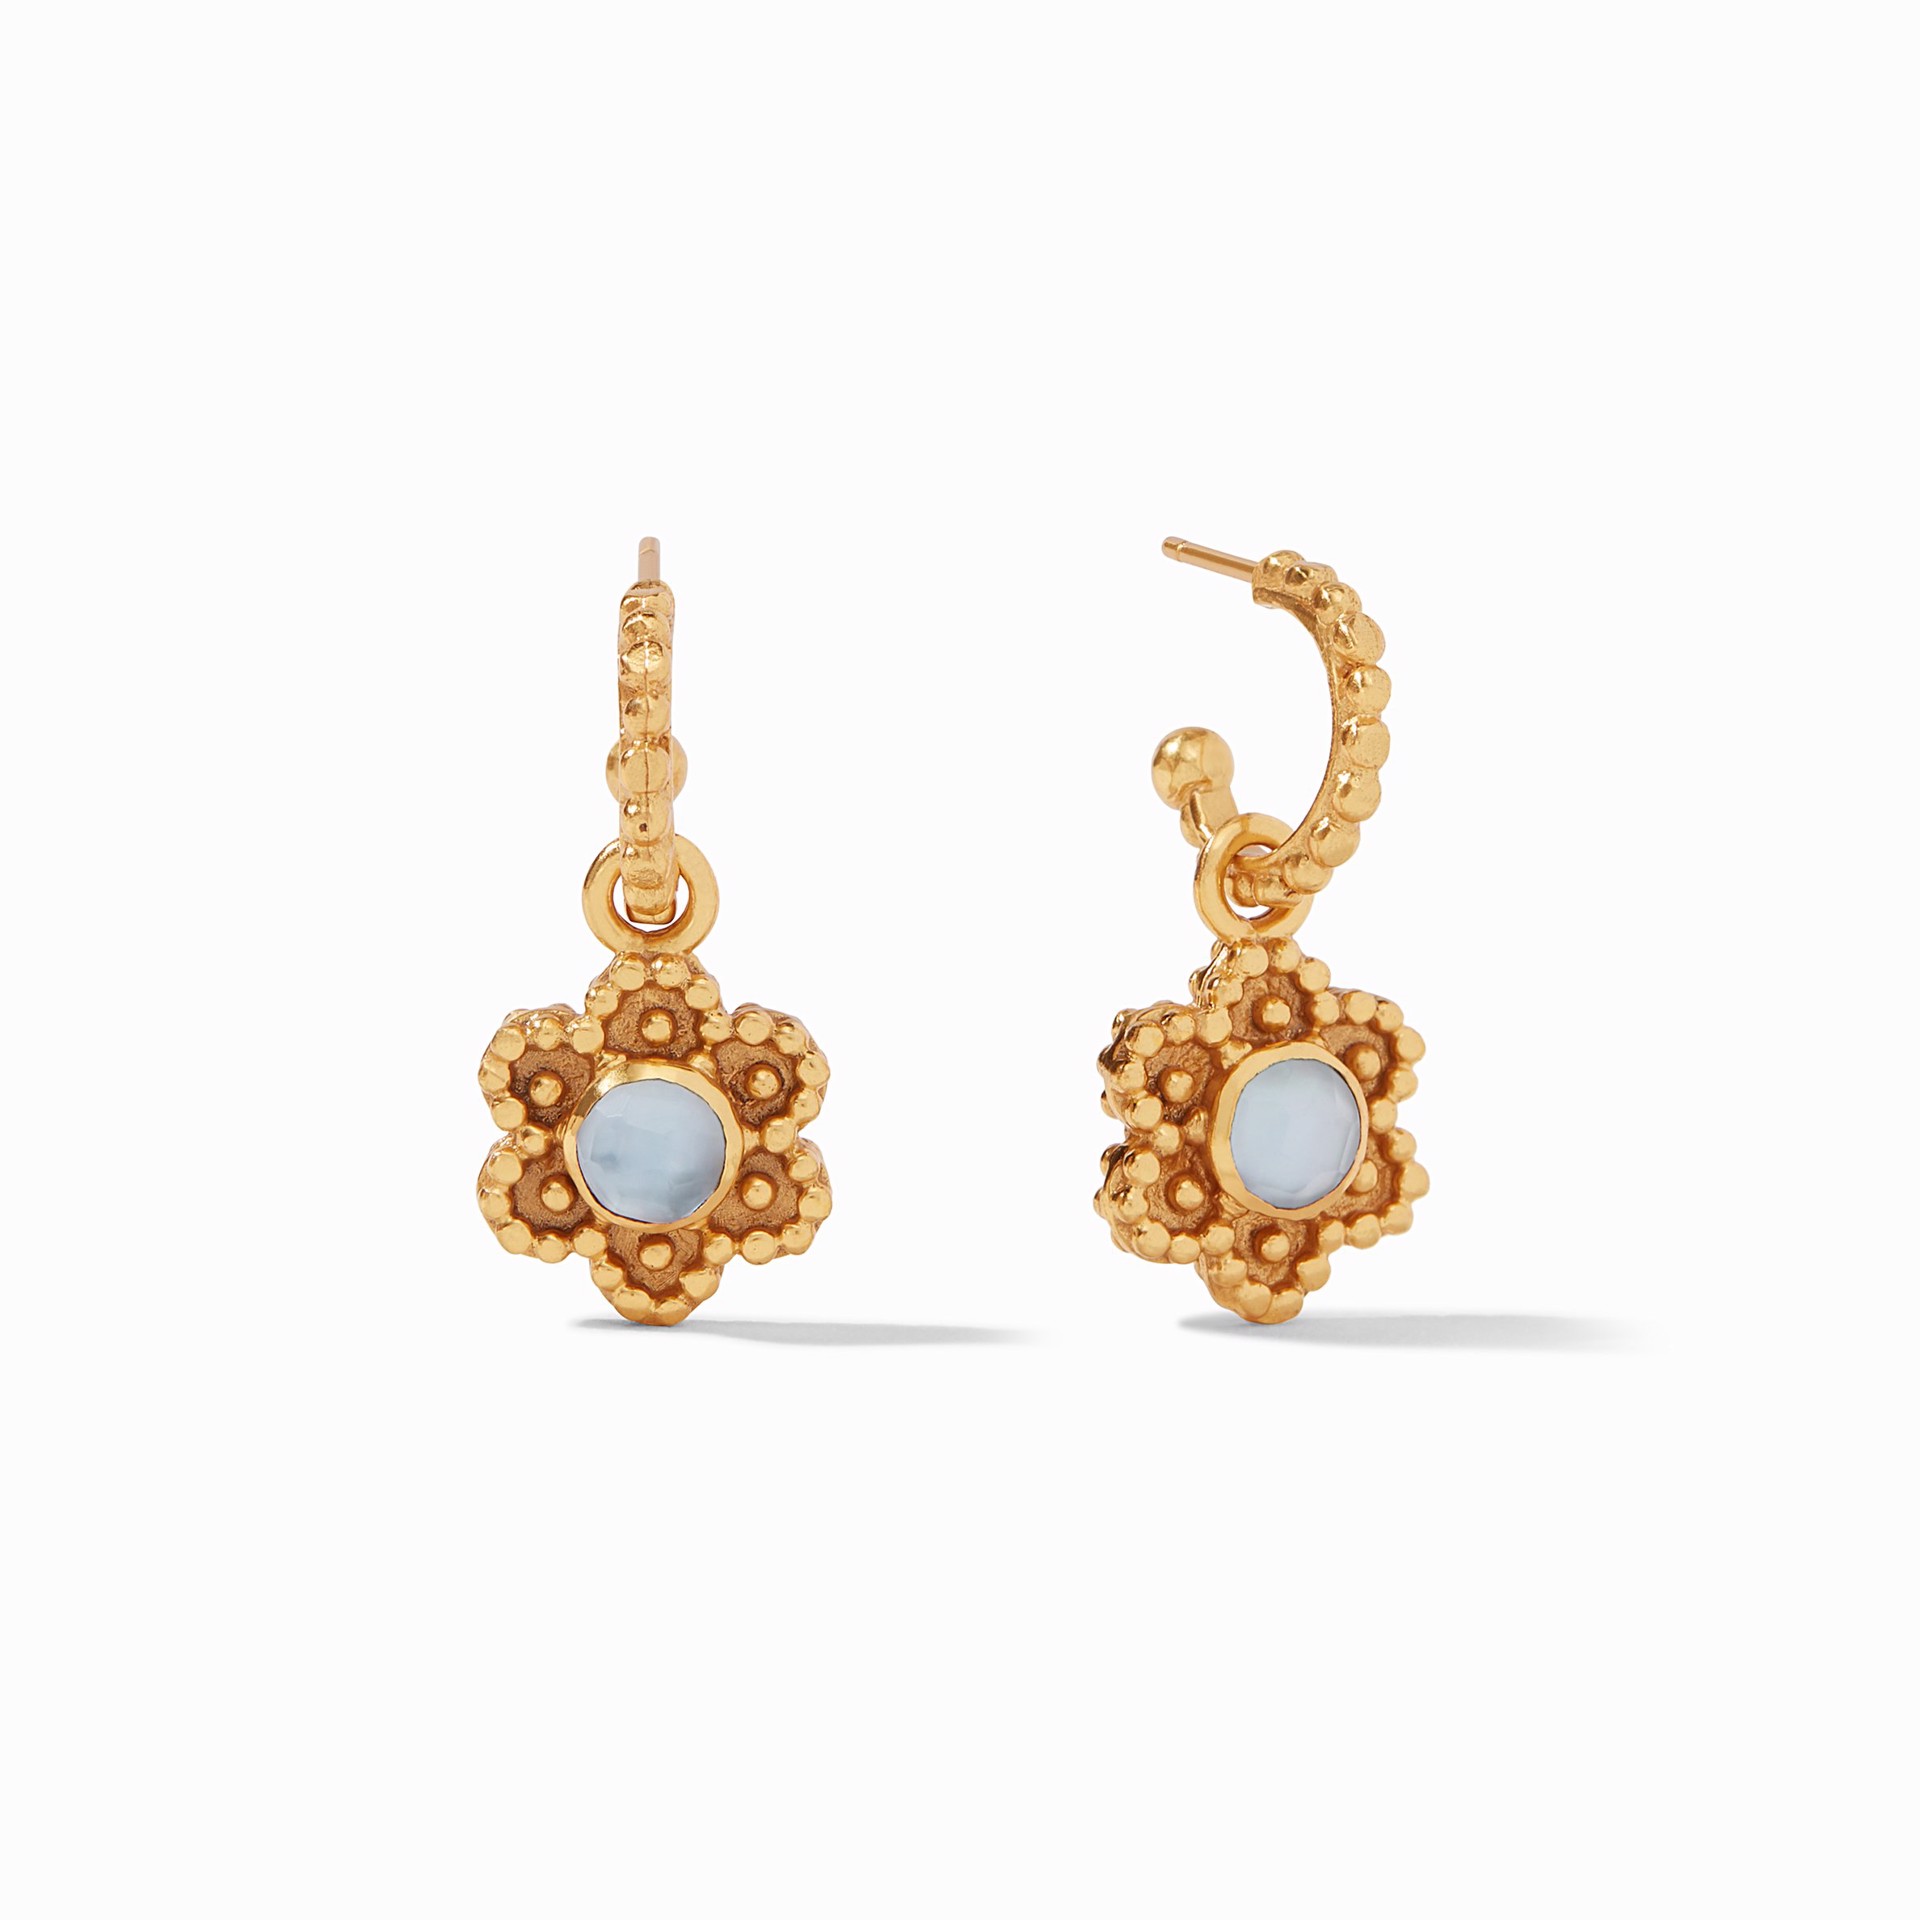 Colette Hoop & Charm Earring - Iridescent Chalcedony Blue by Julie Vos